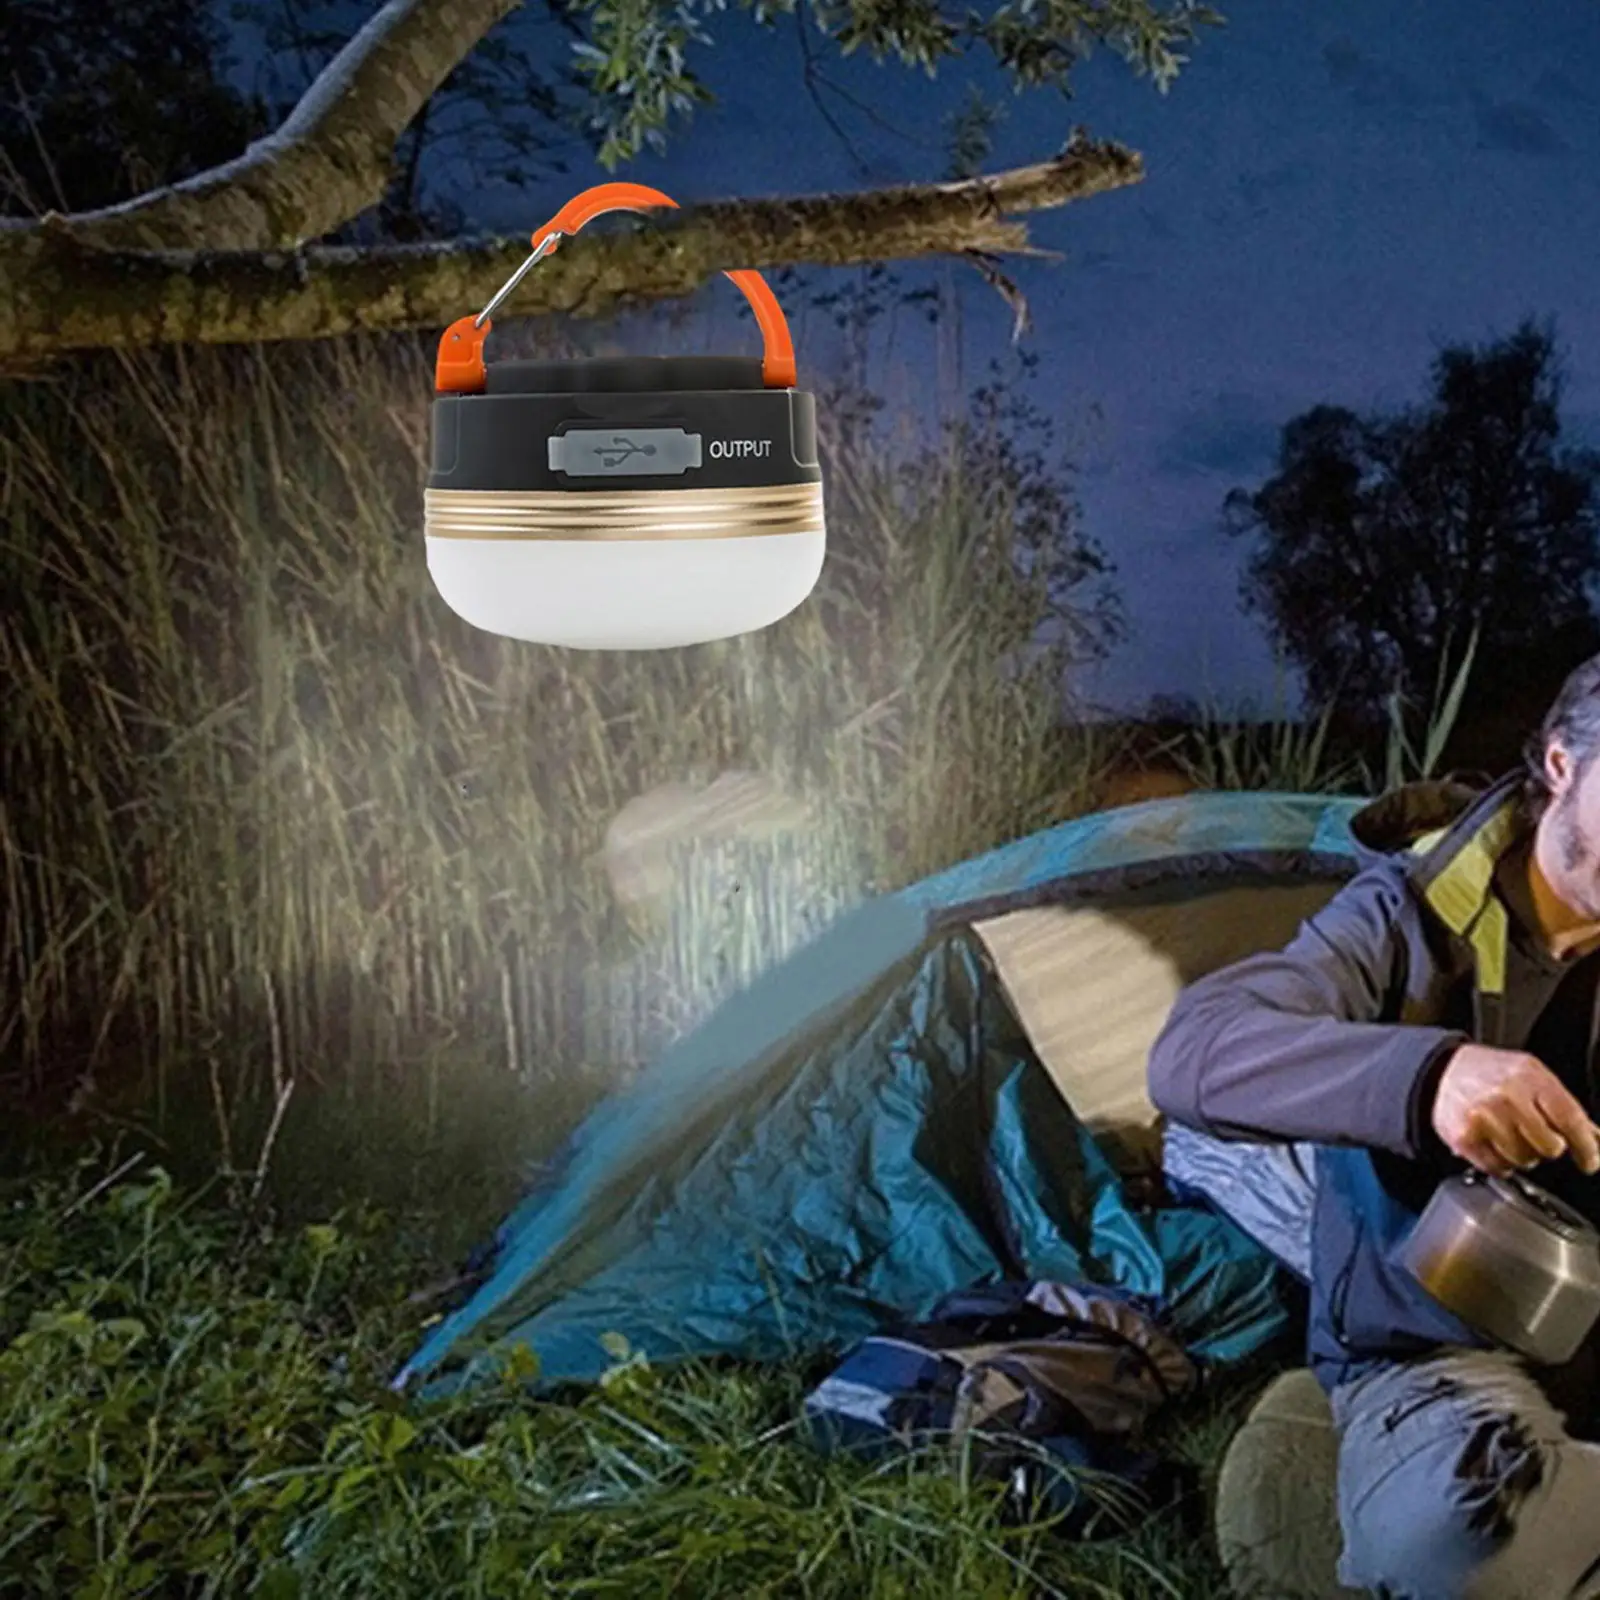 LED Camping Lantern IP43 Waterproof 180LM Tent Light for Power Failure Camping Equipment Survival Gear Fishing Backpacking